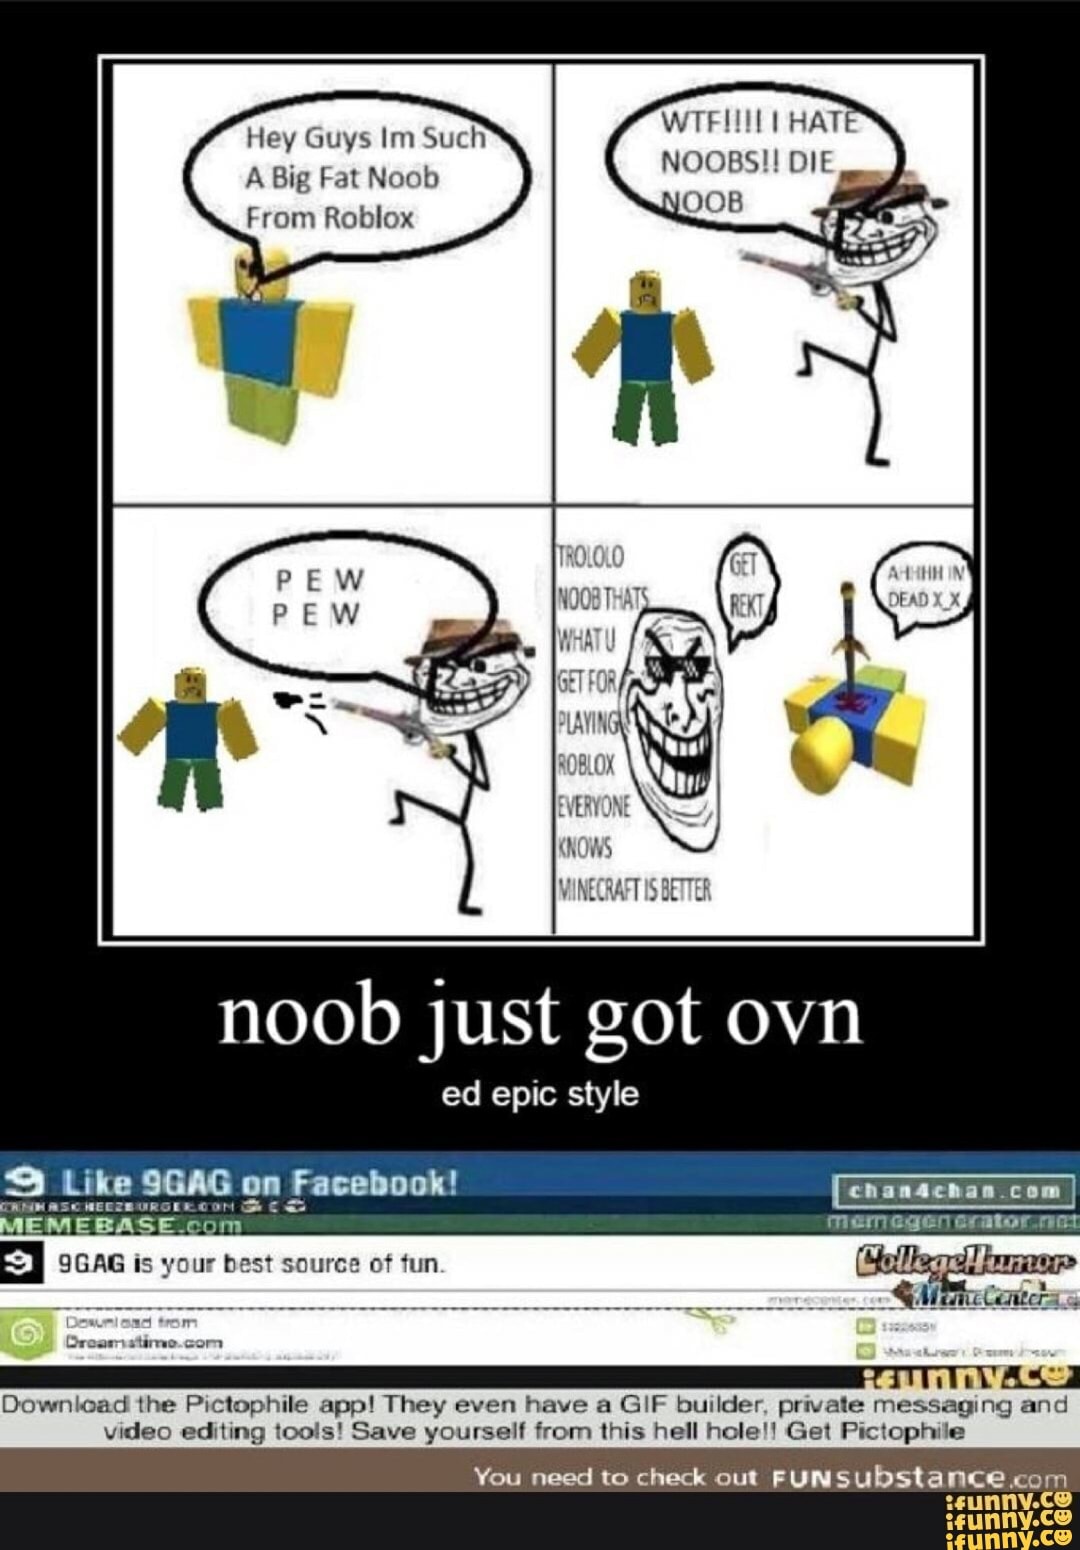 Hey Guys Im Such A Big Fat Noob From Roblox Noob Just Got Ovn I N Mi Download The Plclophile App They Even Have A Gif Bwlder Pnvale Messaging And Wdeo Editing - roblox noob tumblr